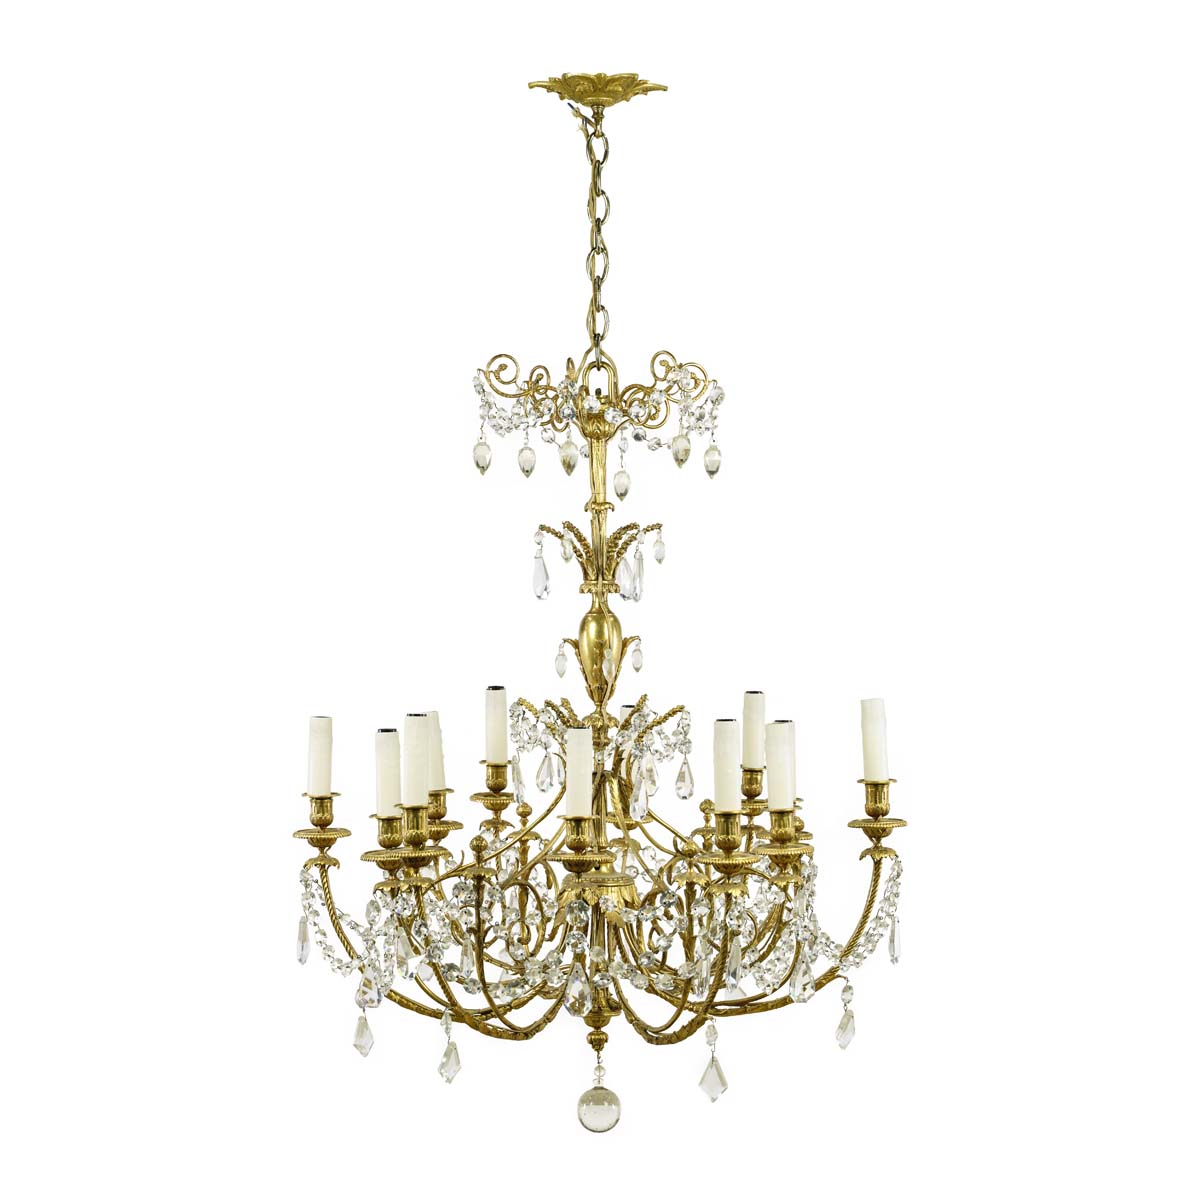 Antique French 12 arm brass and crystal chandelier